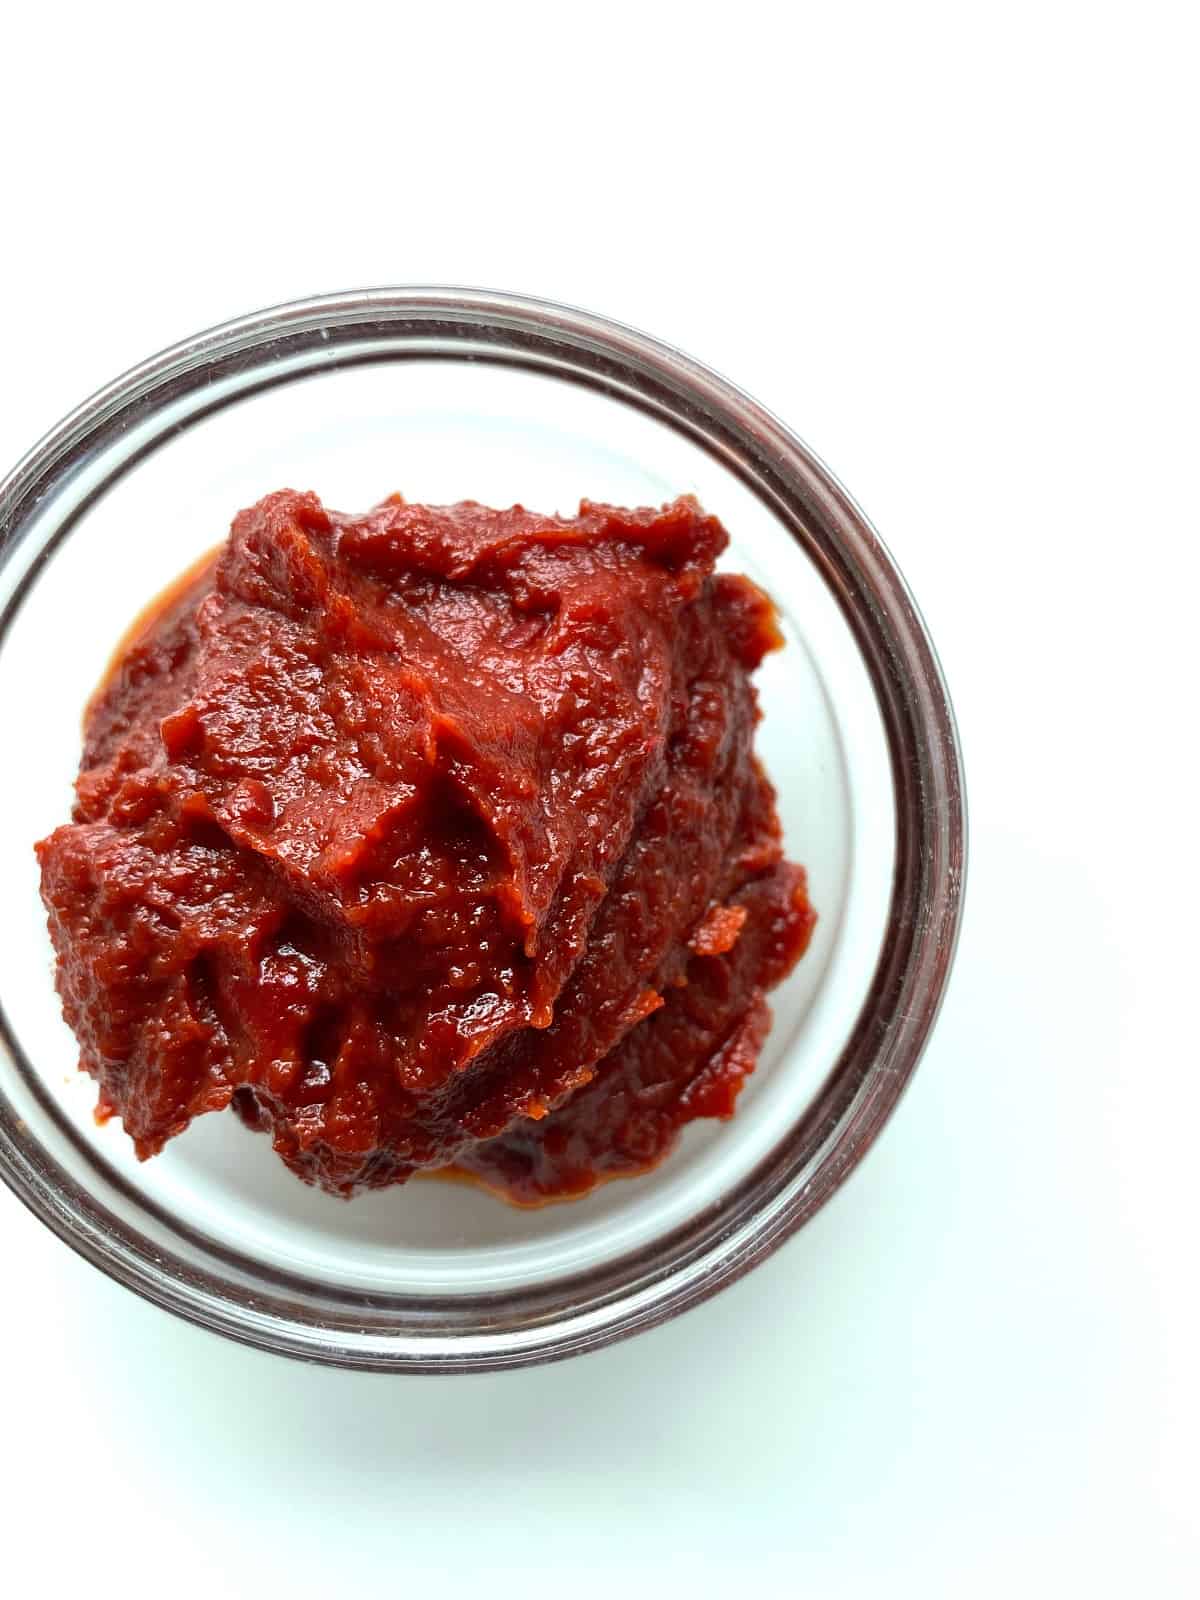 An image of a small glass bowl filled with Turkish Tomato and Pepper Paste.